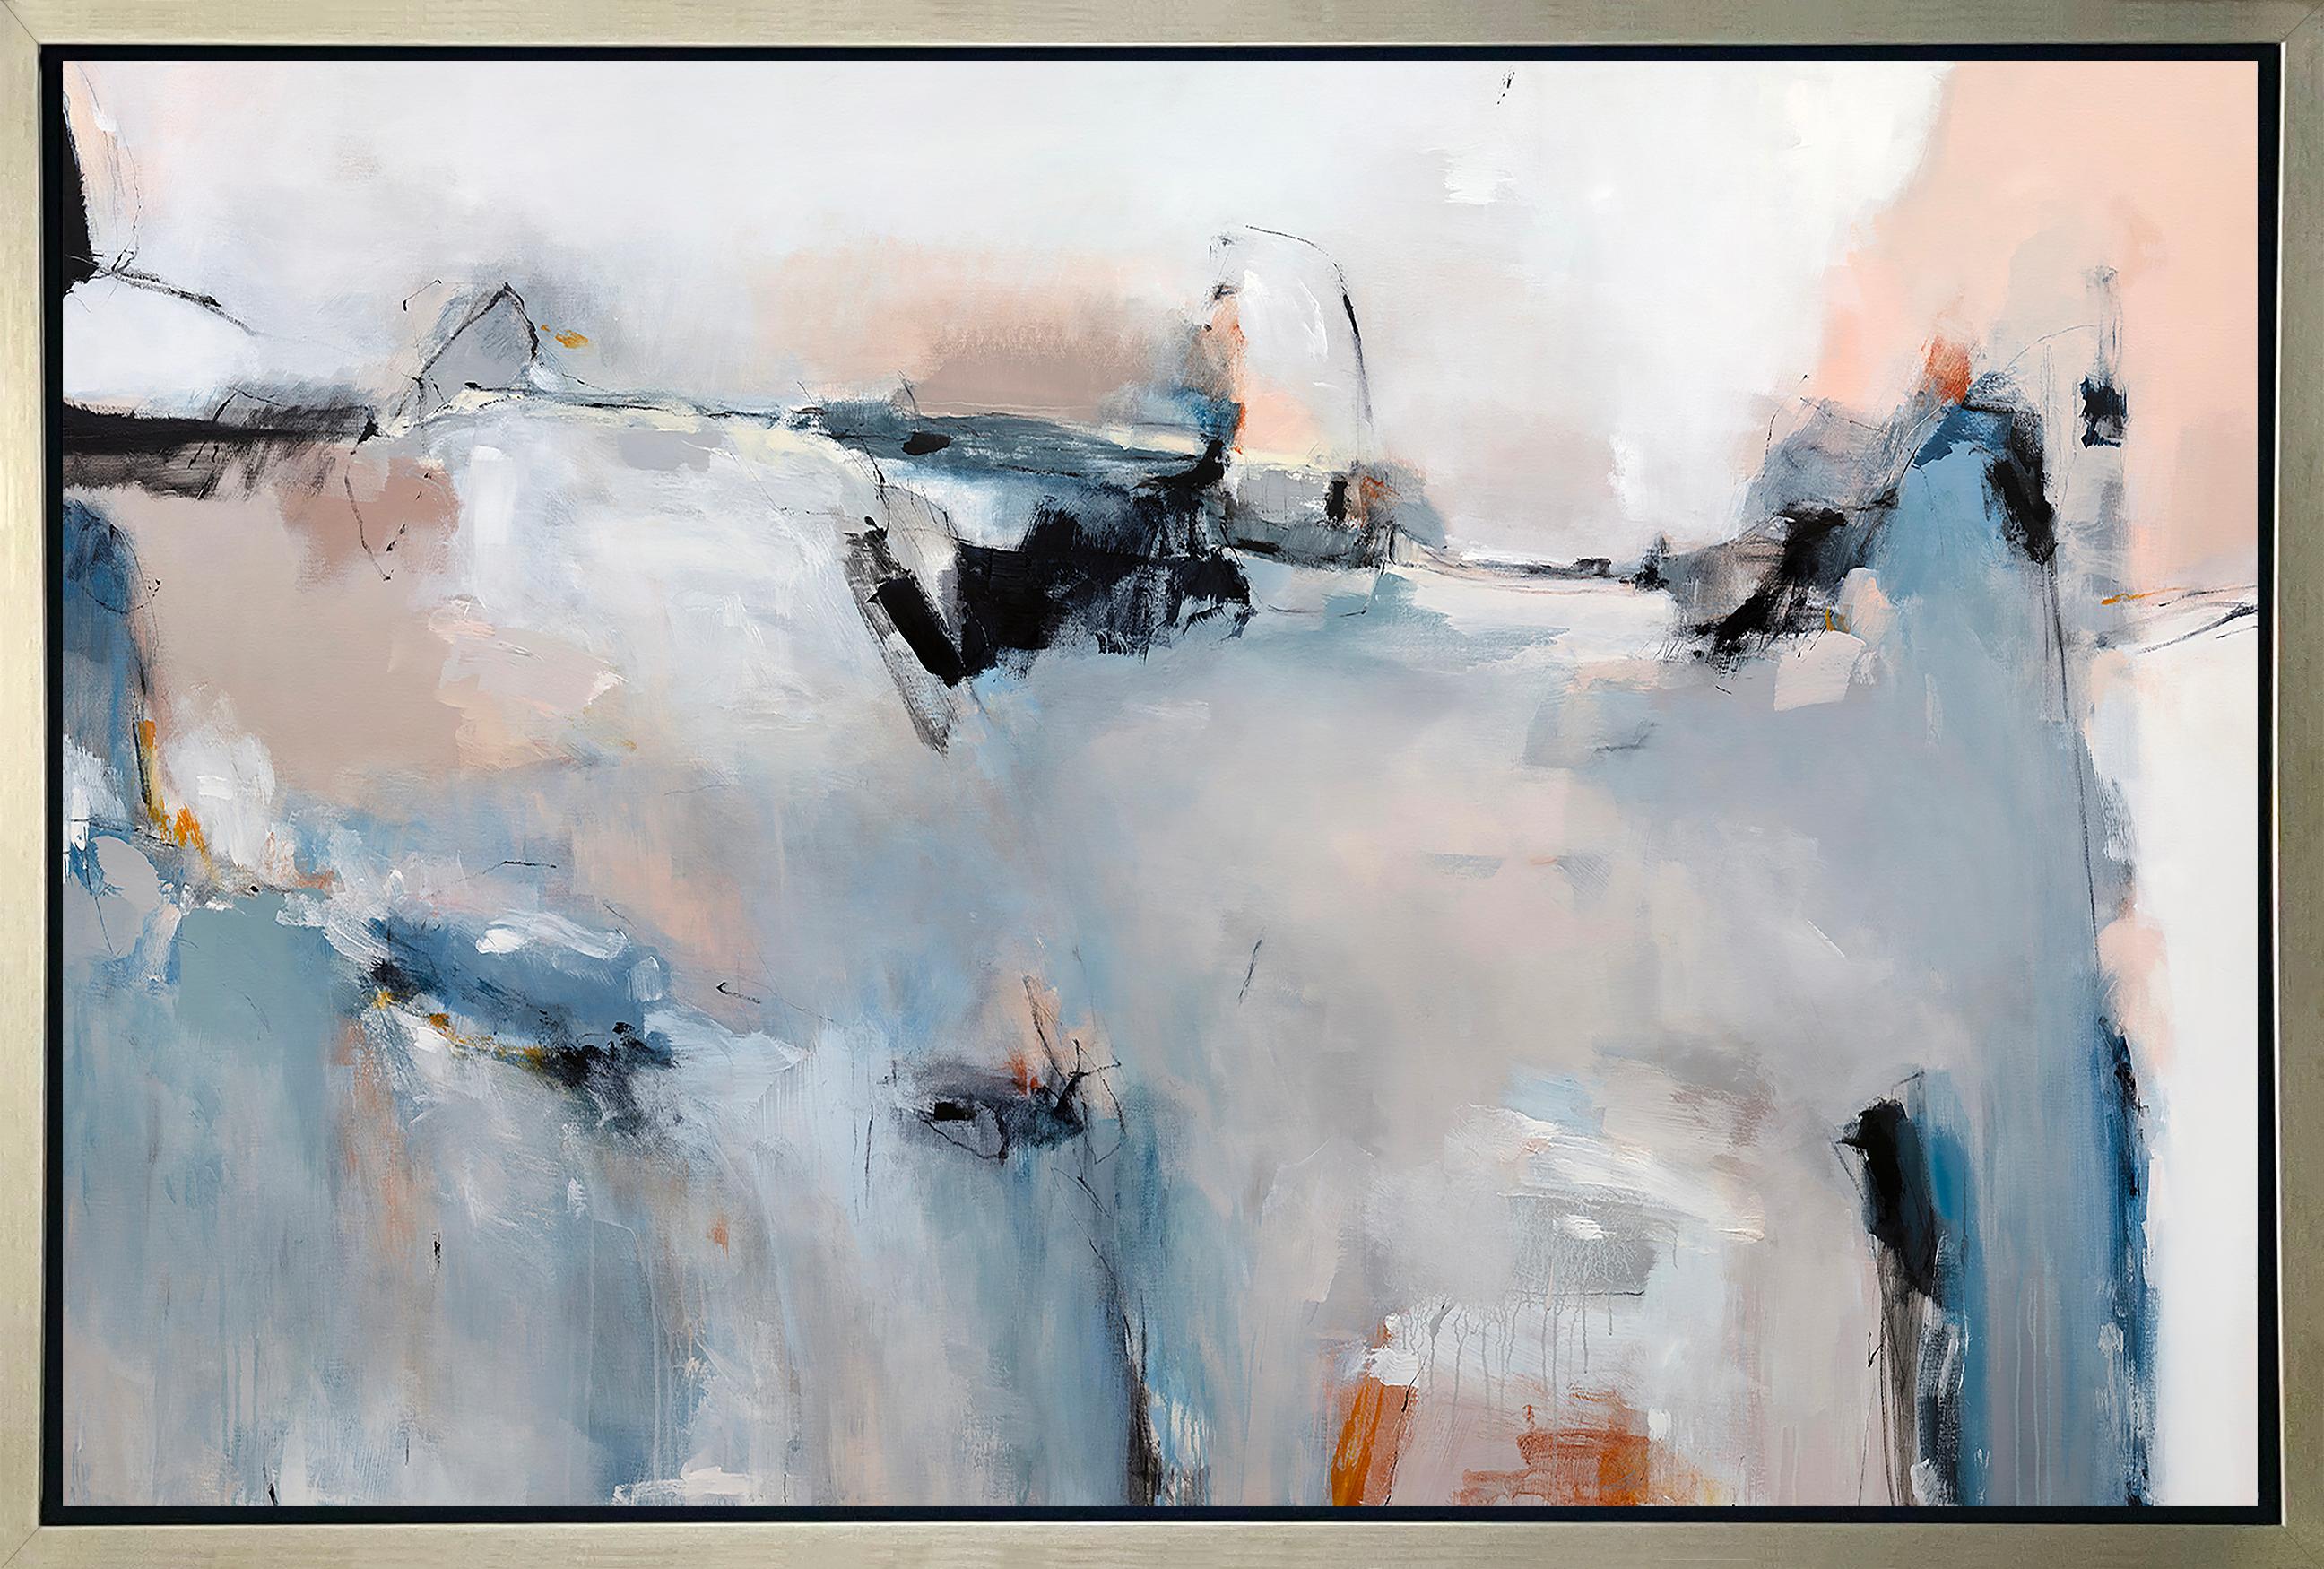 Kelly Rossetti Abstract Print - "Transparent Frontier, " Framed Limited Edition Giclee Print, 36" x 54"